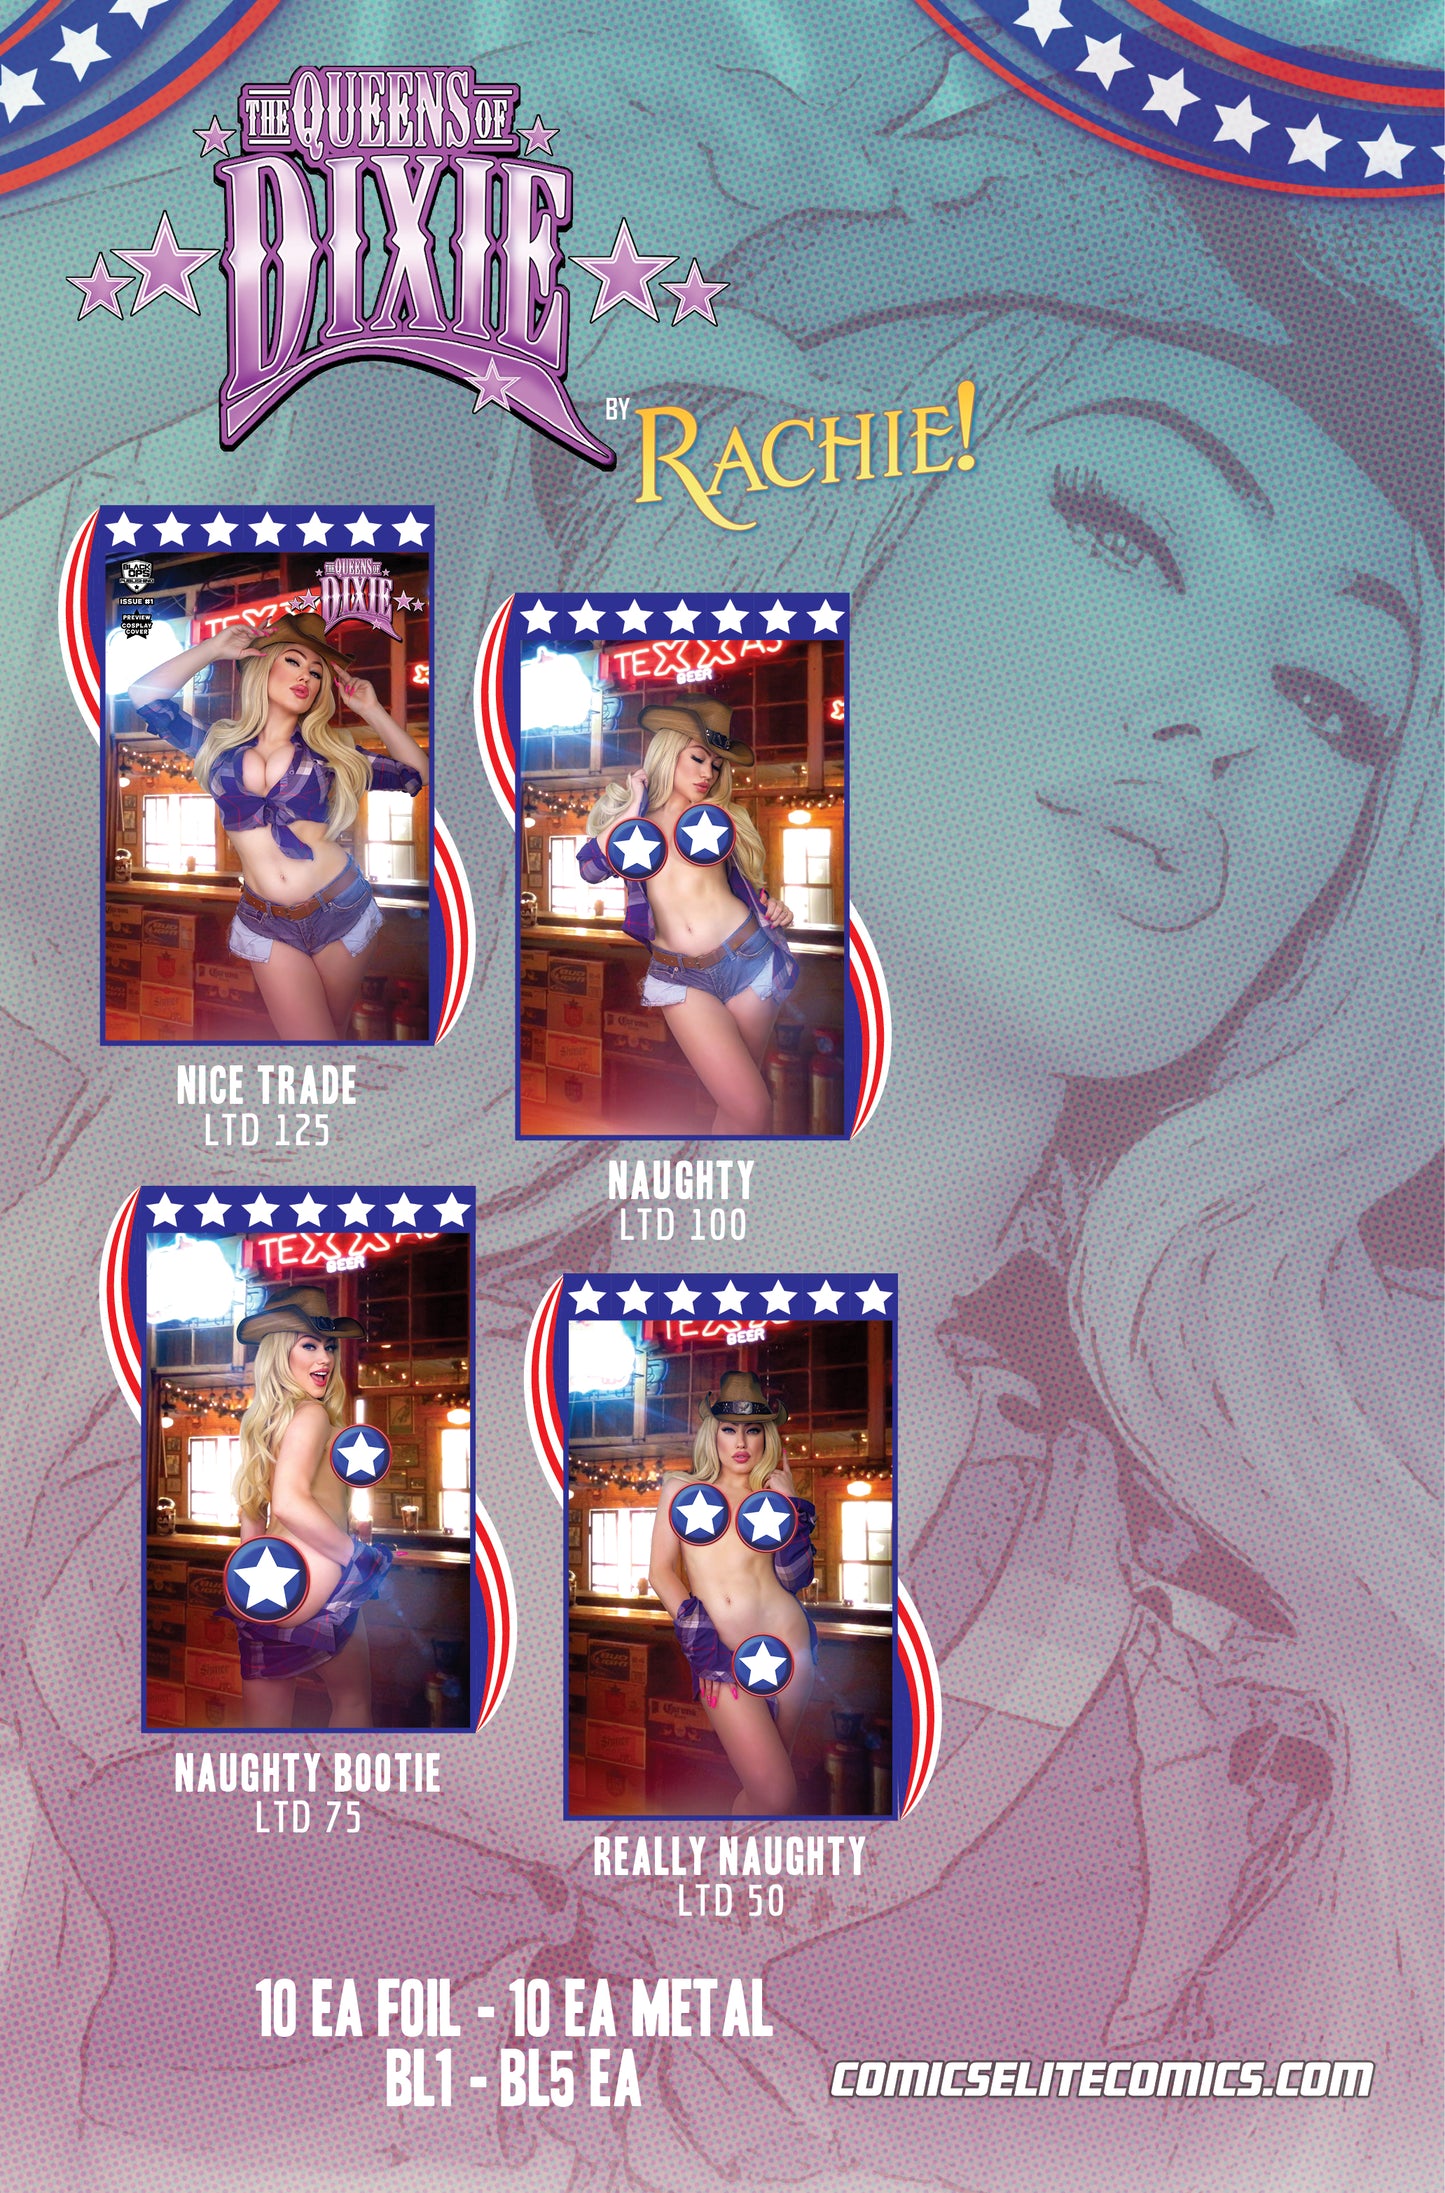 QUEENS OF DIXIE #1 PREVIEW - FACES BY RACHIE - NICE TRADE LTD 125